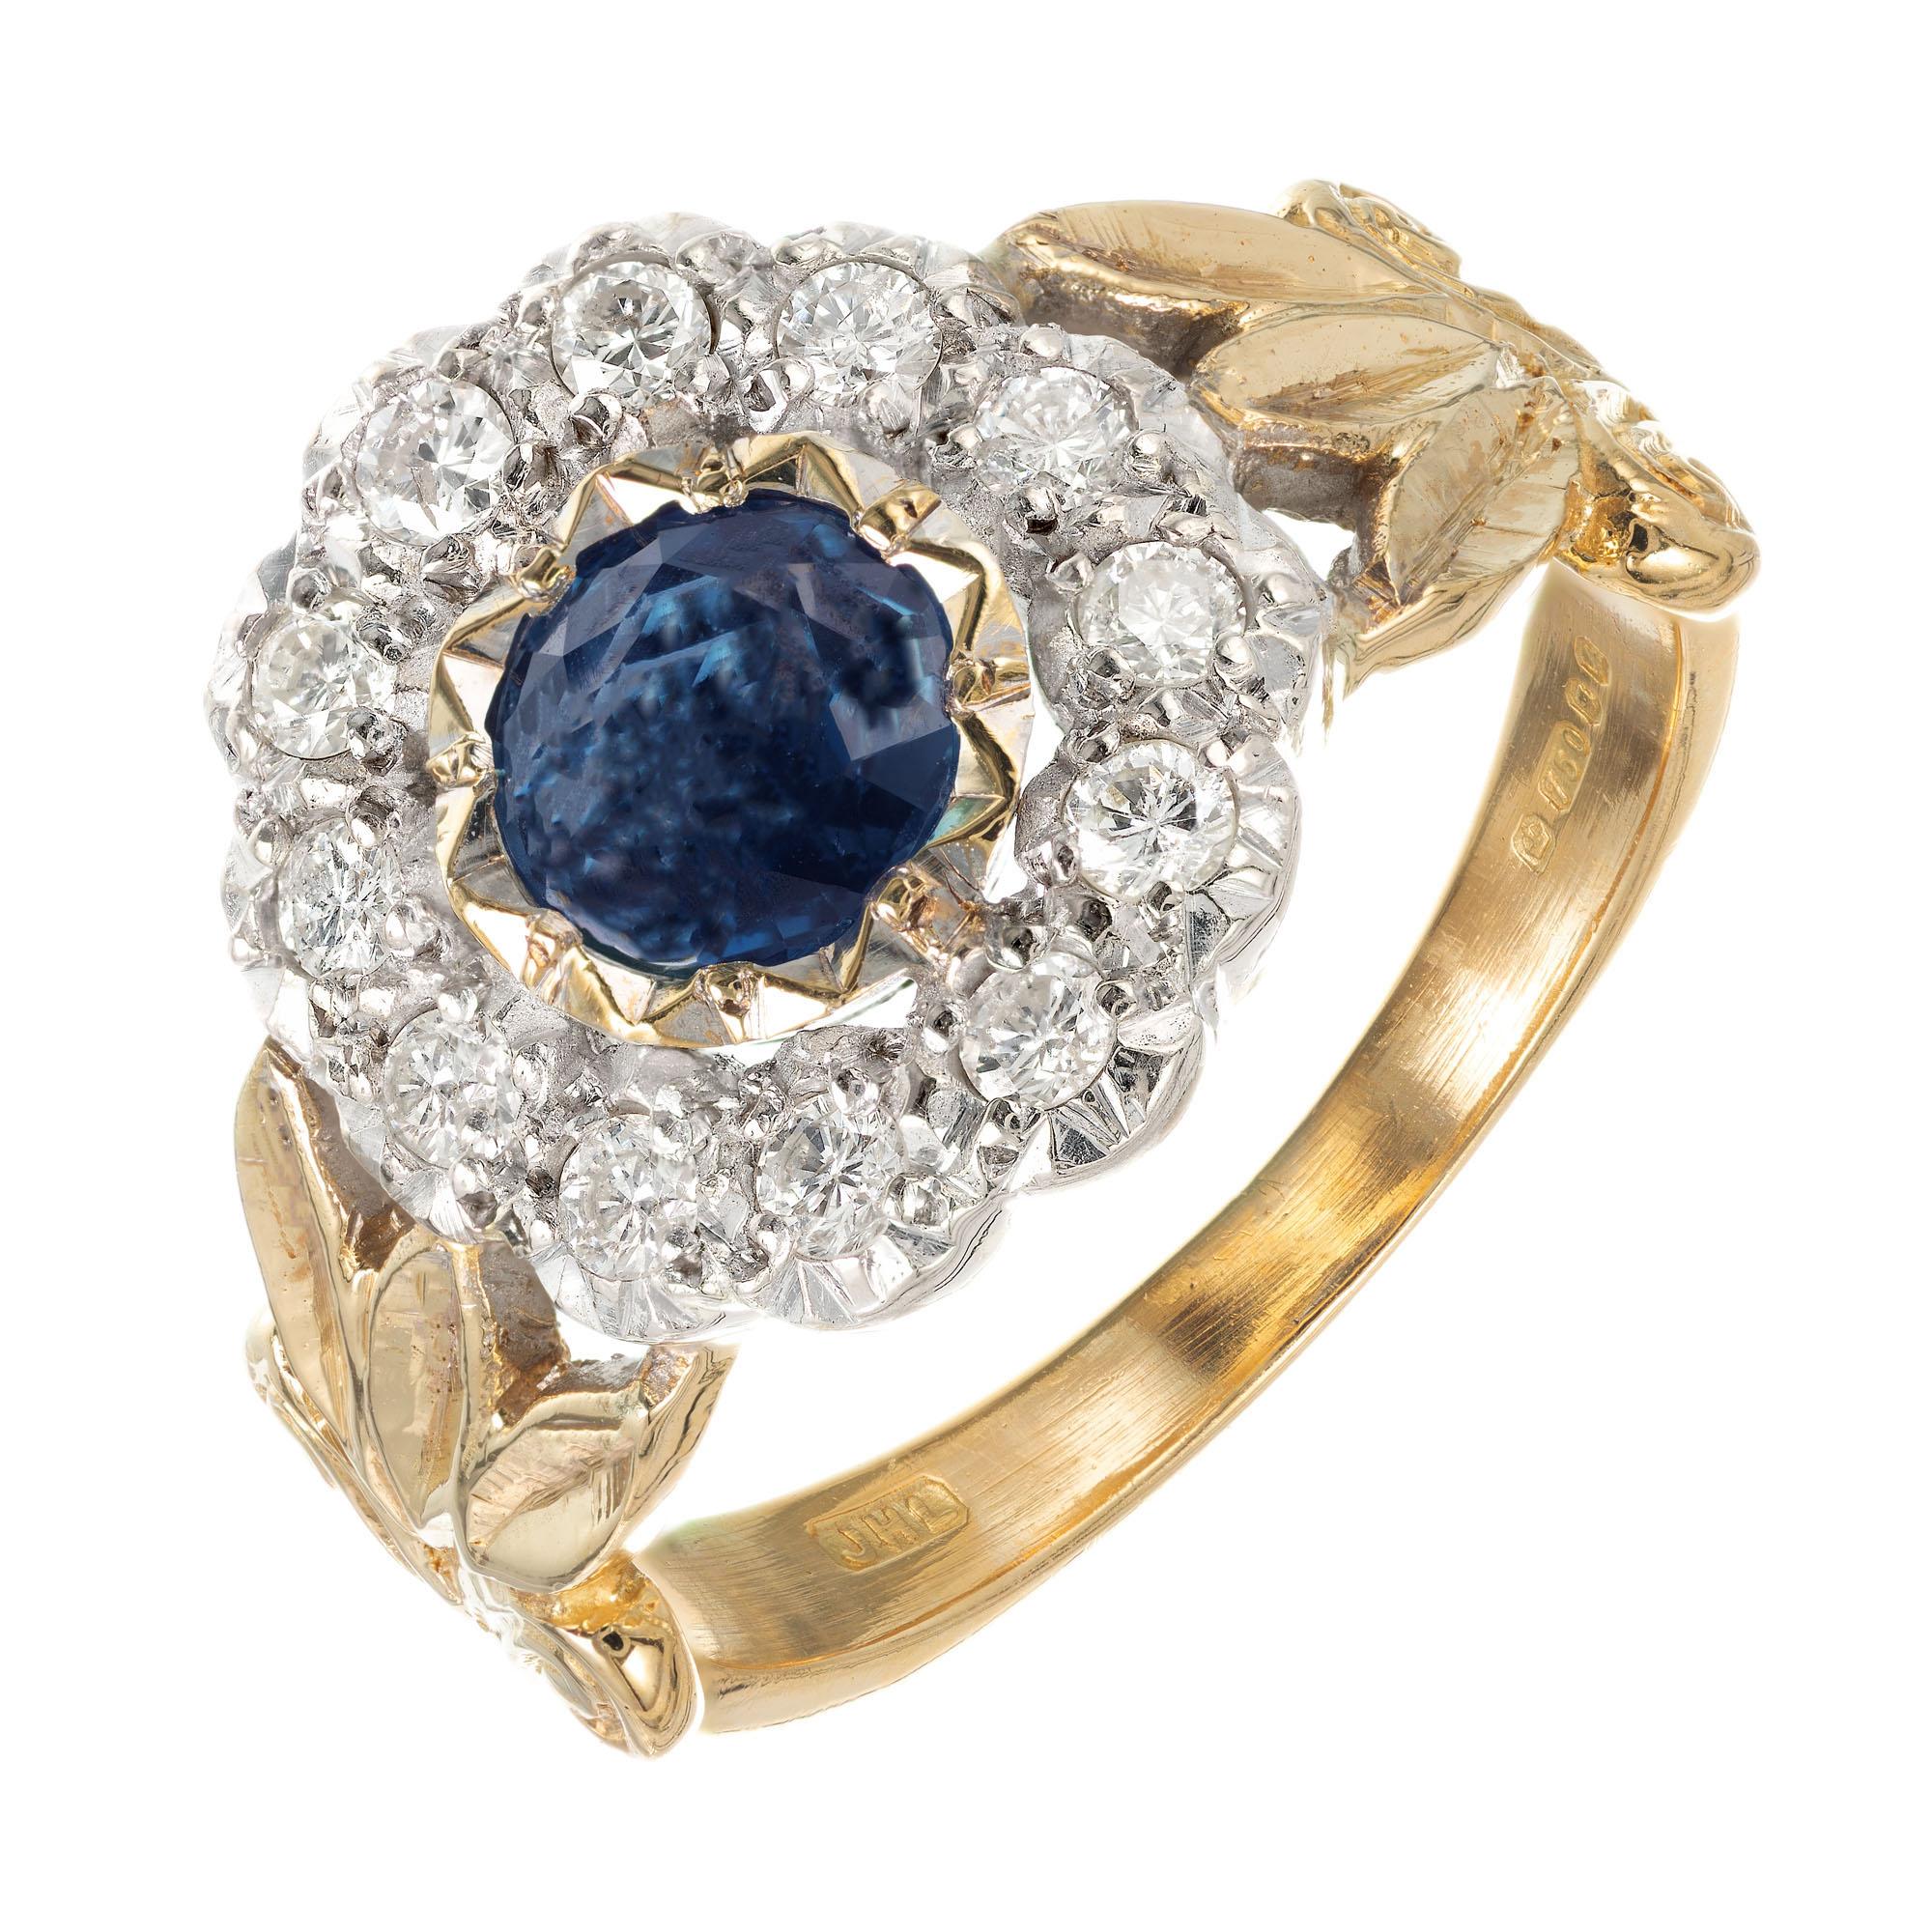 Sapphire and diamond engagement ring. 18k white and yellow gold handmade setting with a round center sapphire and round diamond halo. Circa 1940's

1 round brilliant cut blue sapphire, approx. .50ct
12 round brilliant cut diamonds H-I SI, approx.